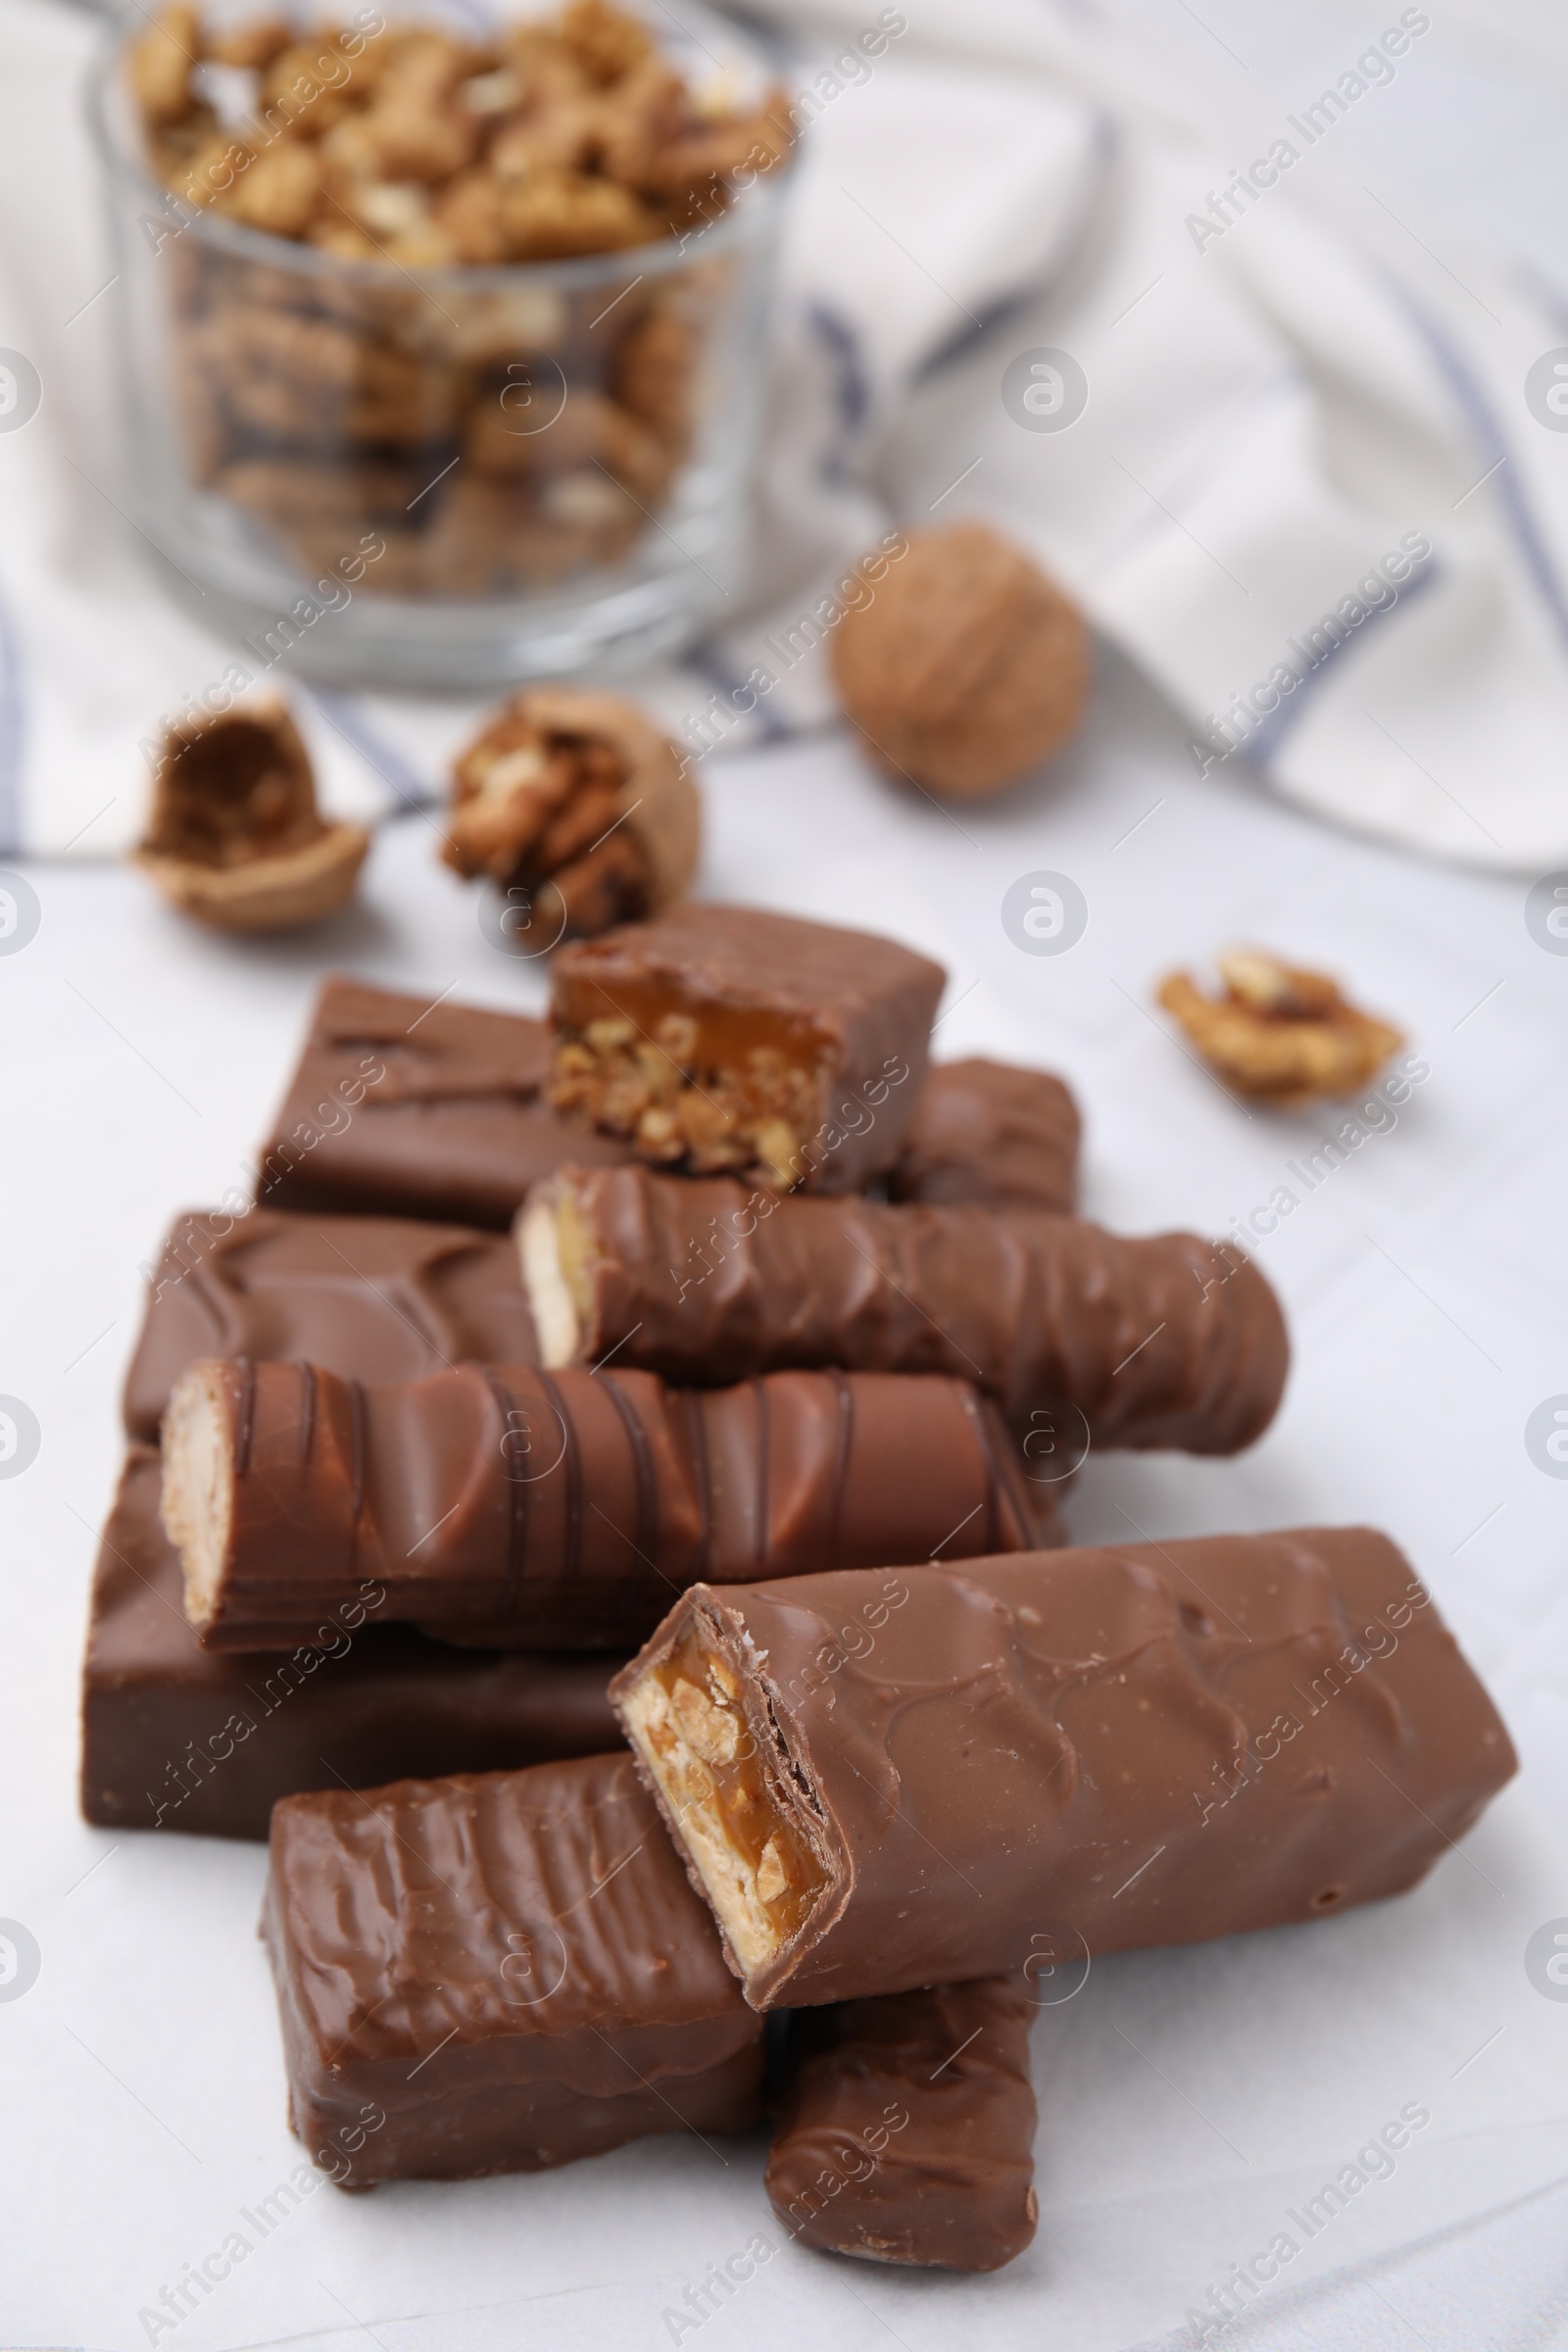 Photo of Pieces of different tasty chocolate bars on white table